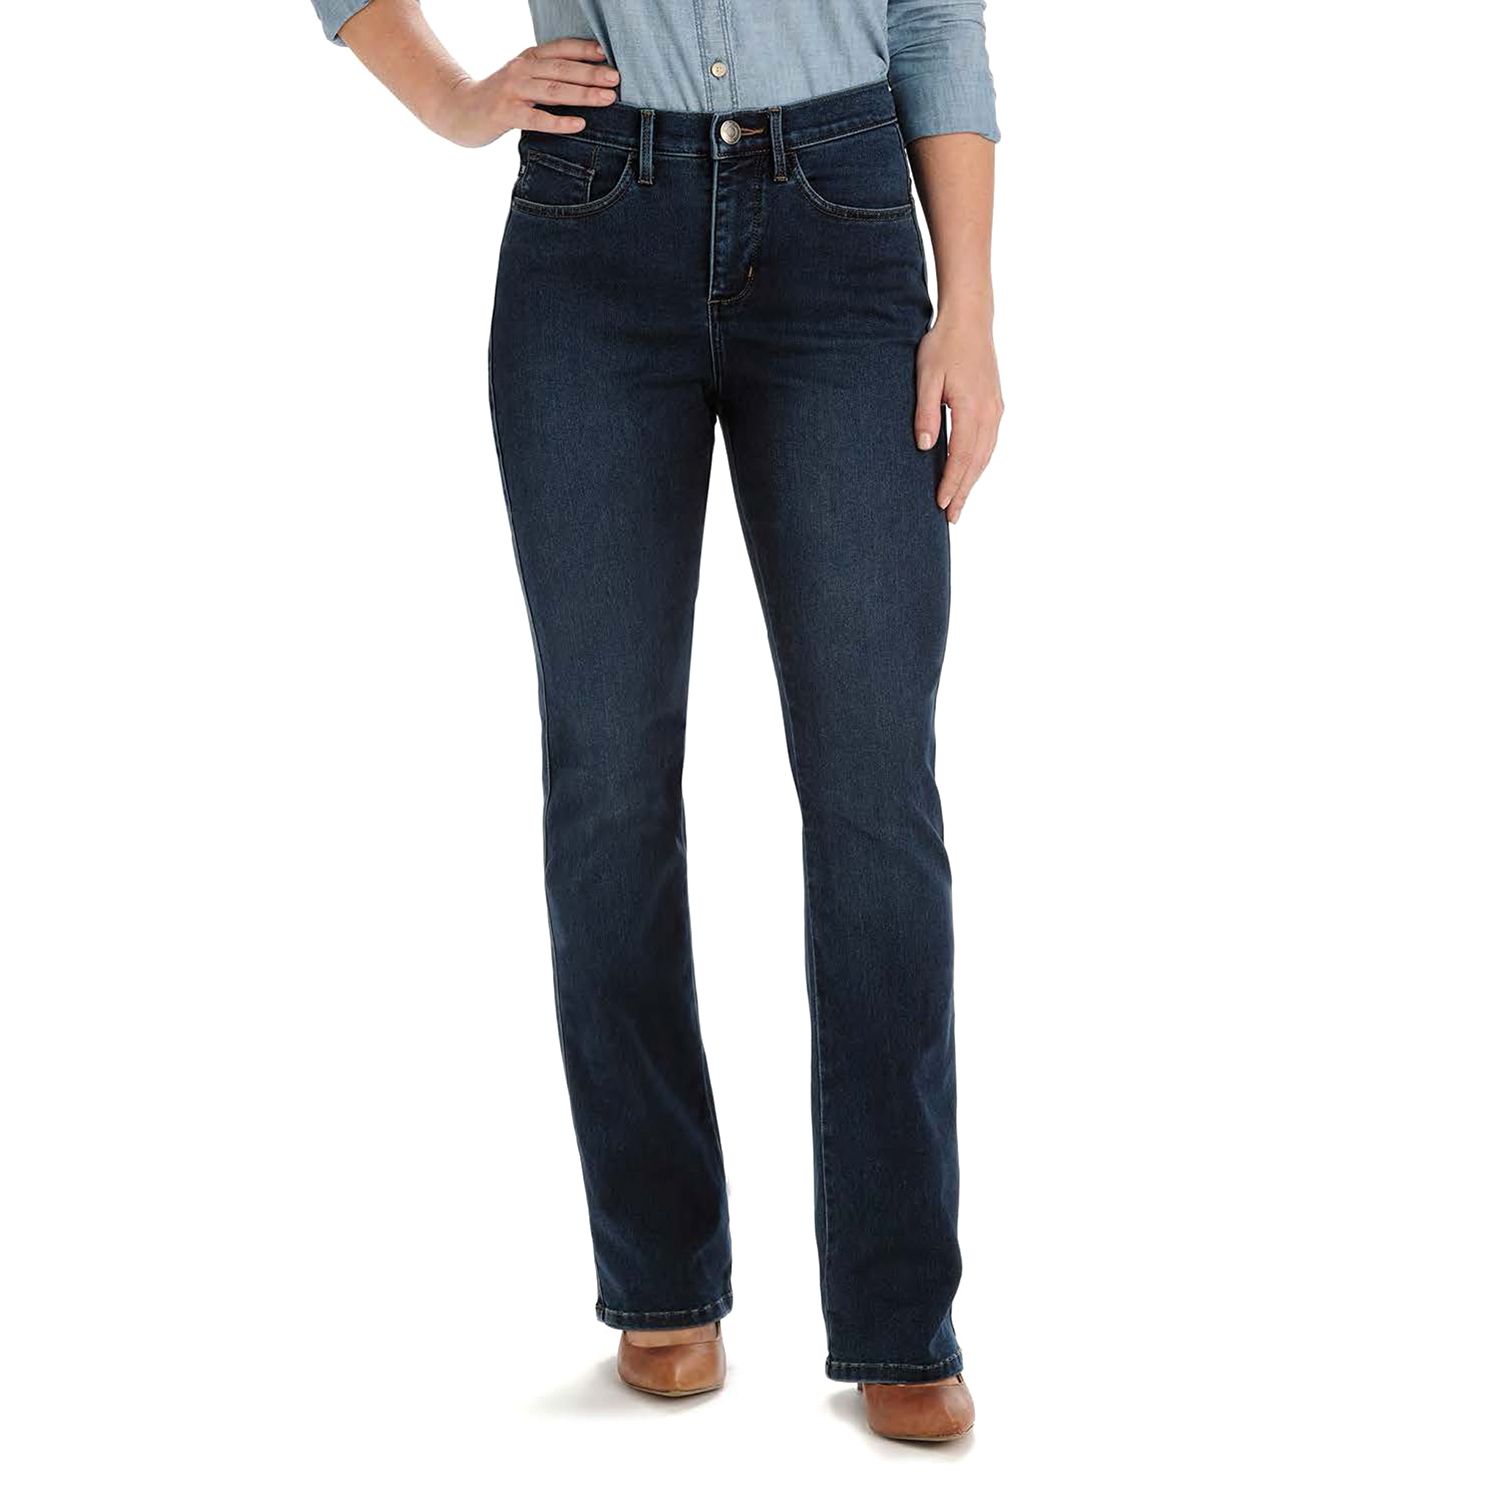 levis silvertab jeans jcpenney